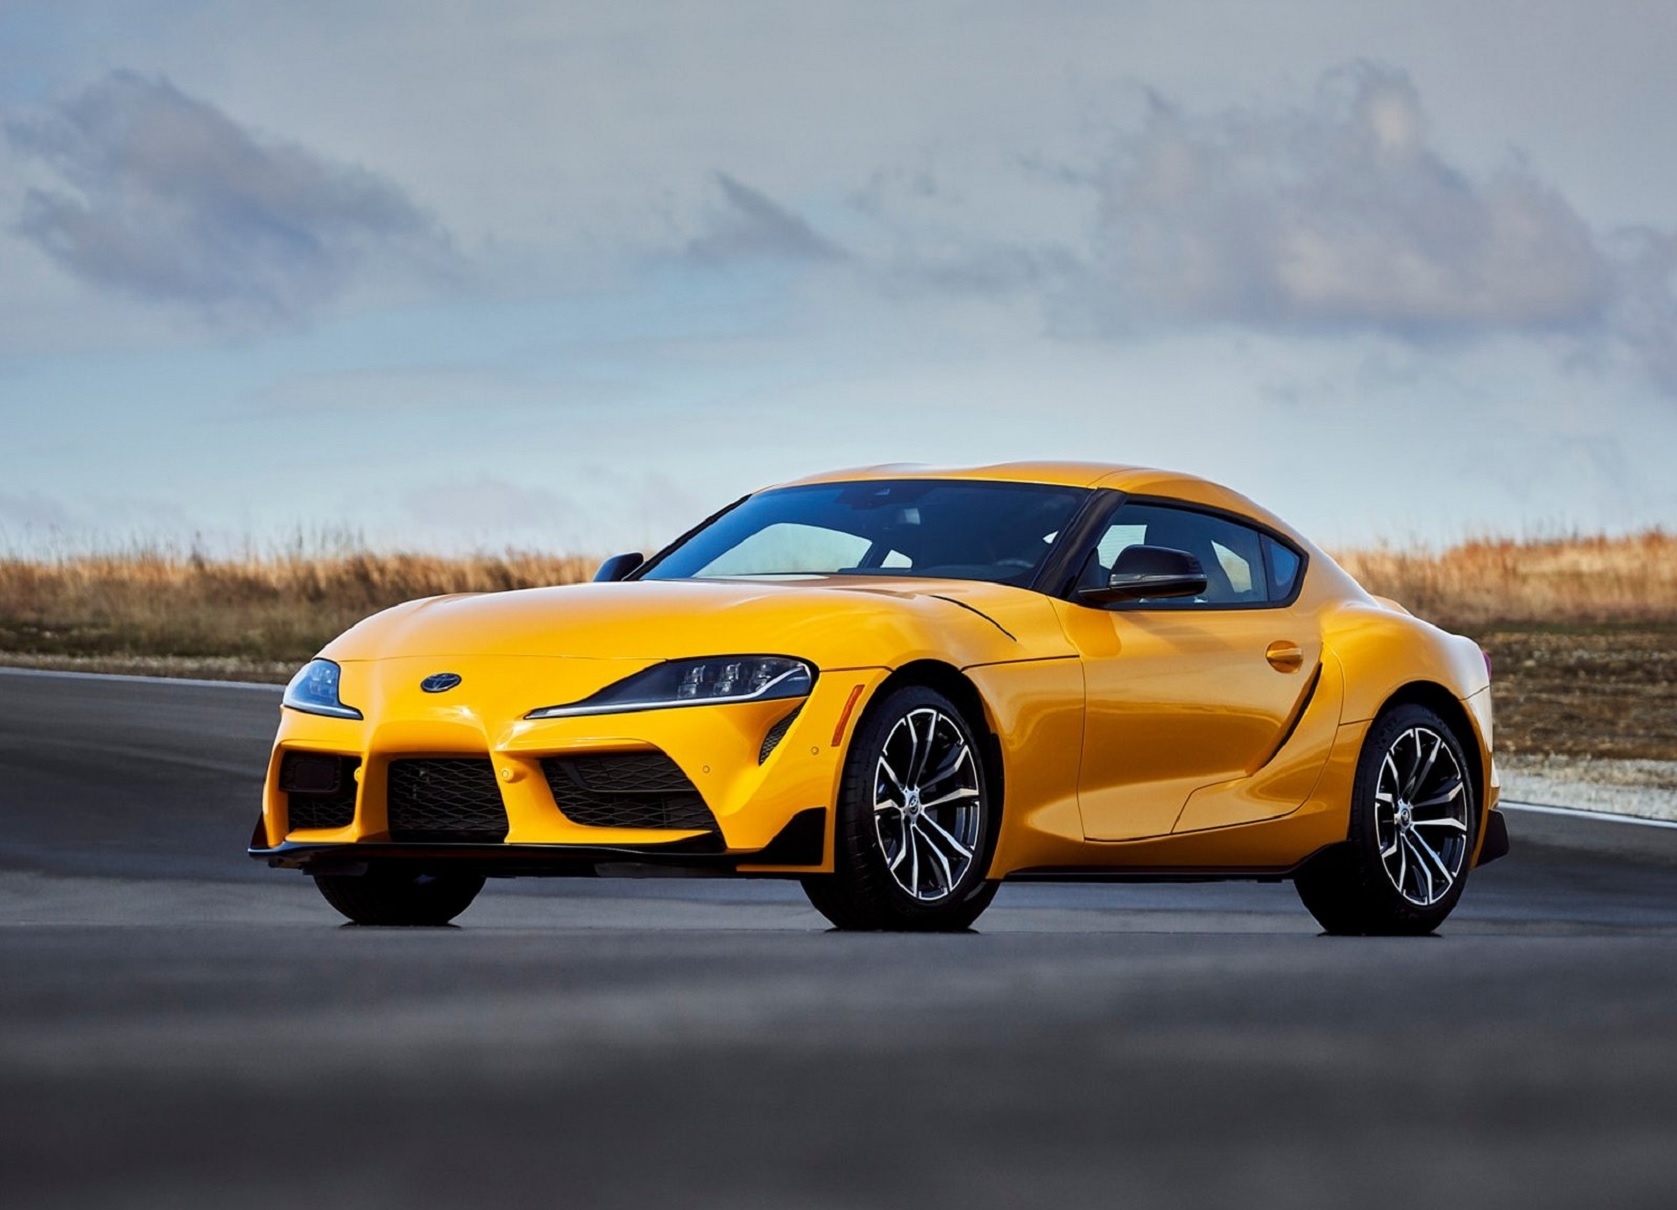 A yellow 2021 Toyota Supra 2.0 parked on a racetrack